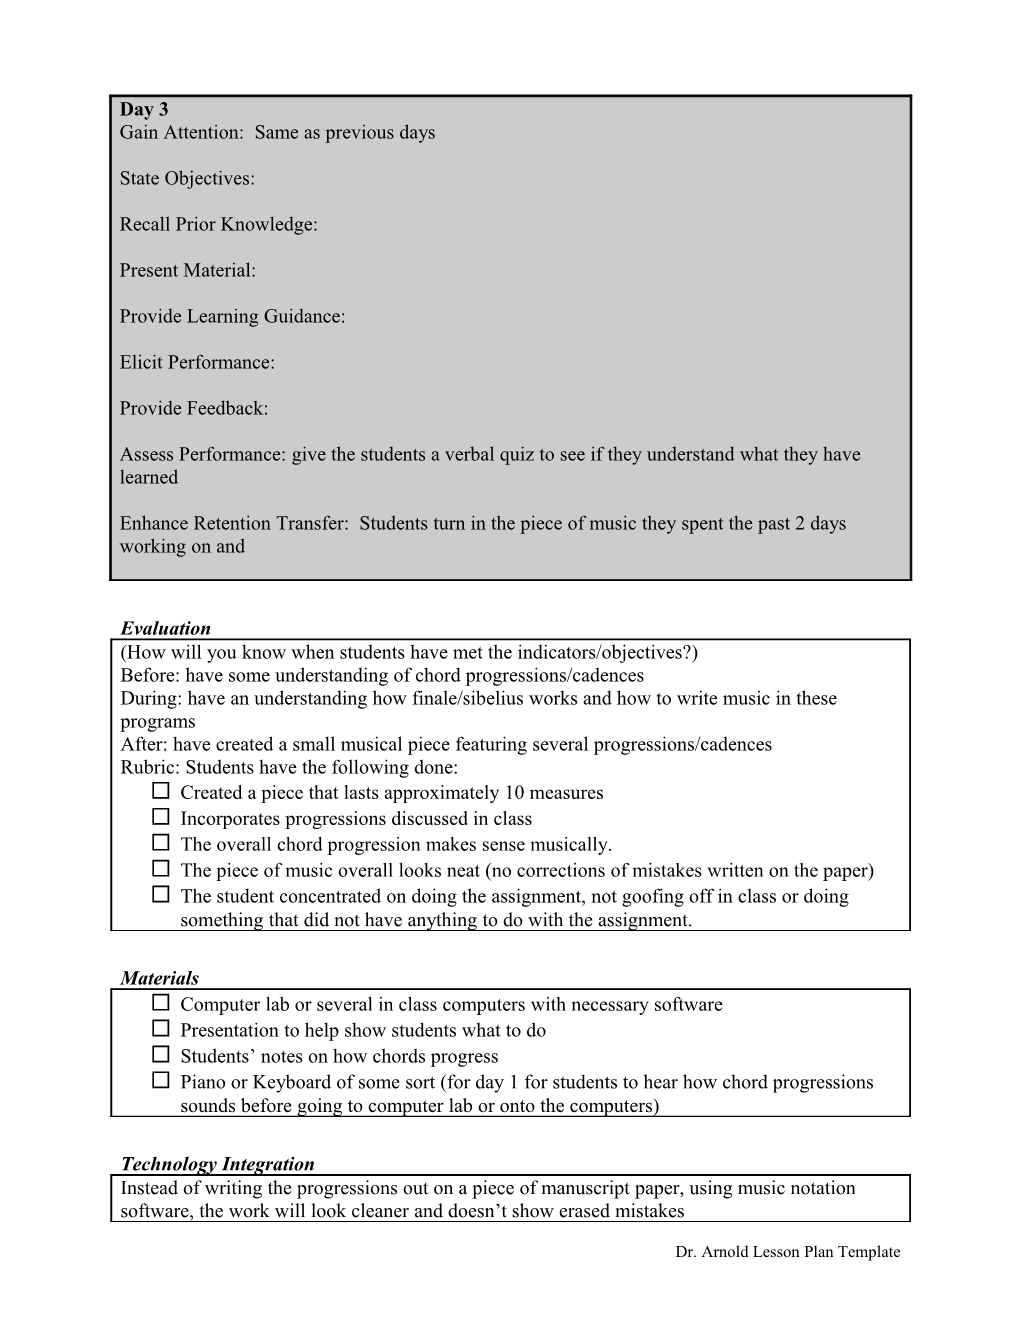 Dr. Arnold Lesson Plan Template